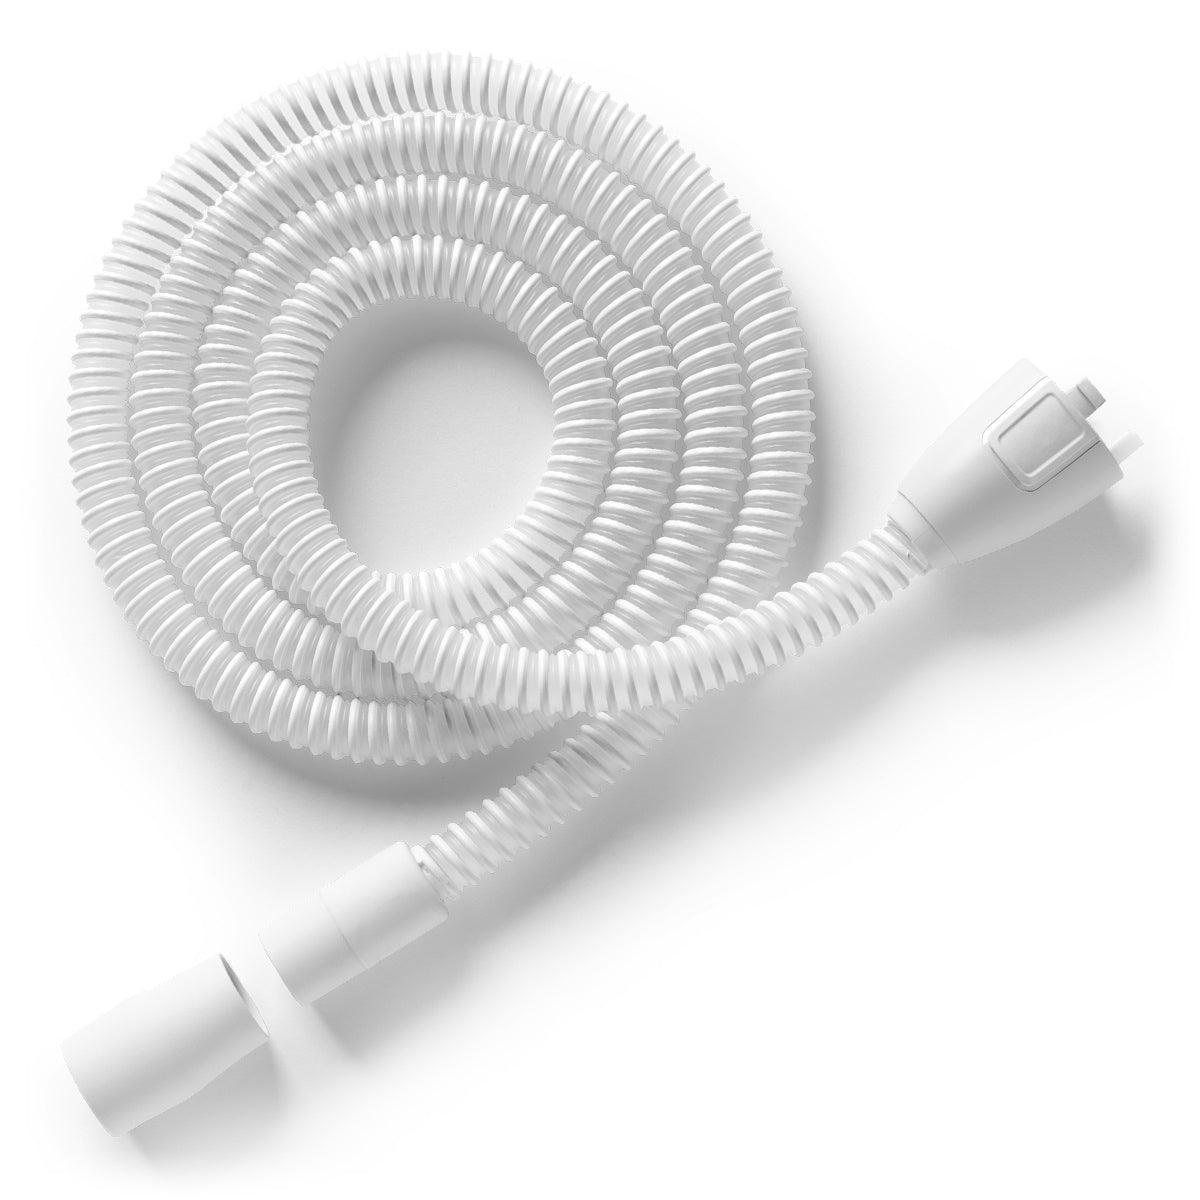 Heated Hose for DreamStation 2 CPAP Machines 12mm